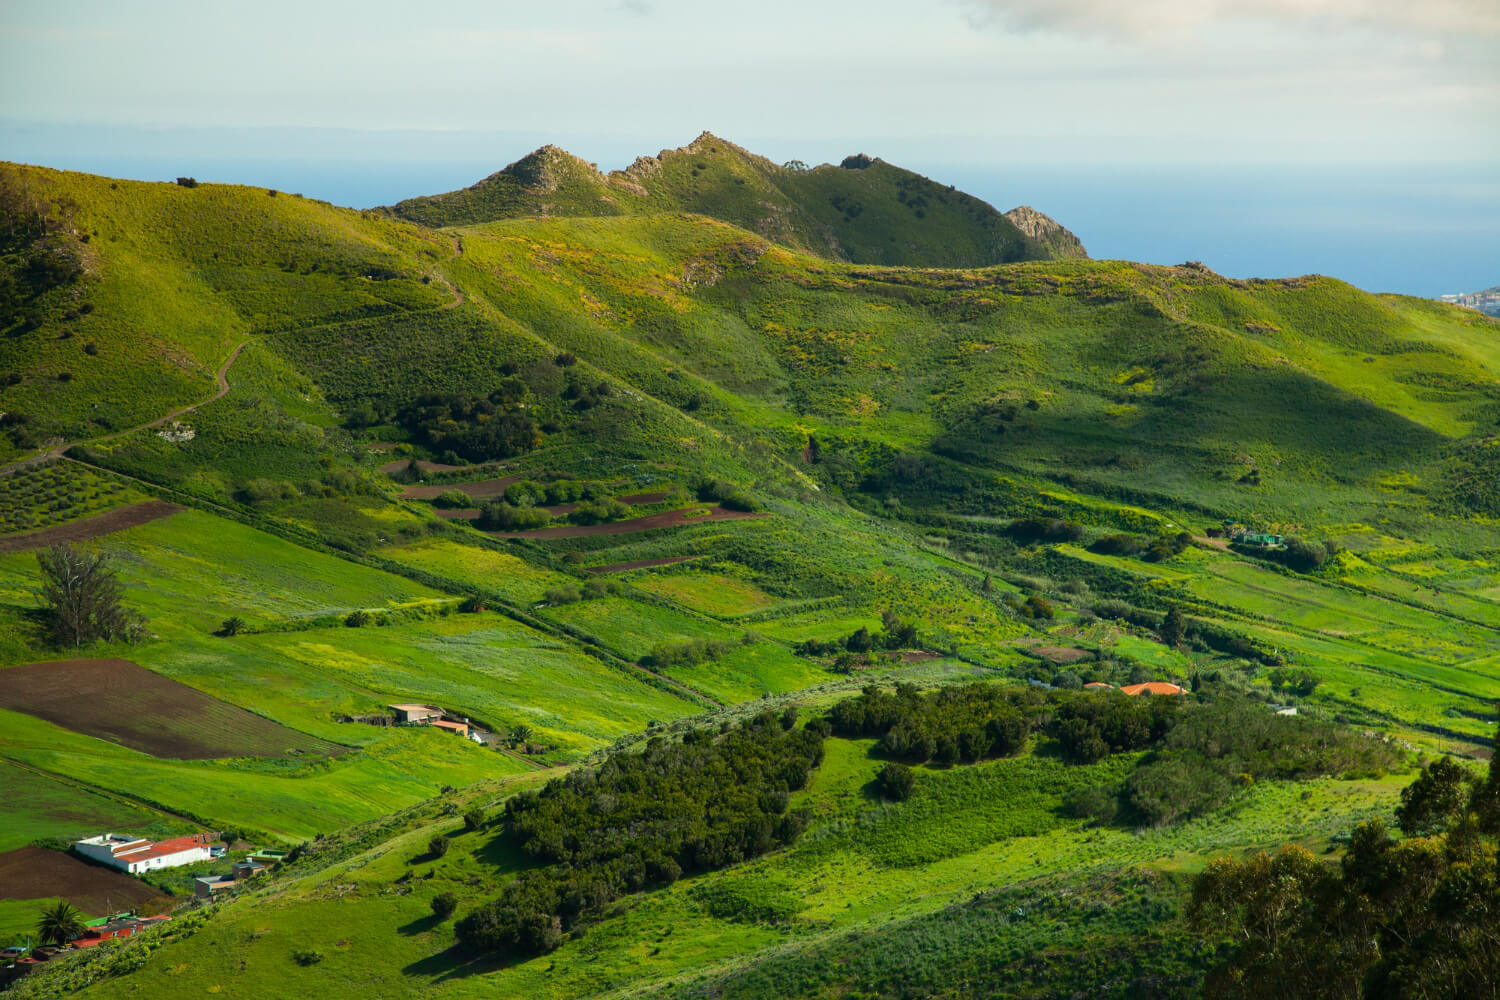 Canary Islands - which island is the greenest?